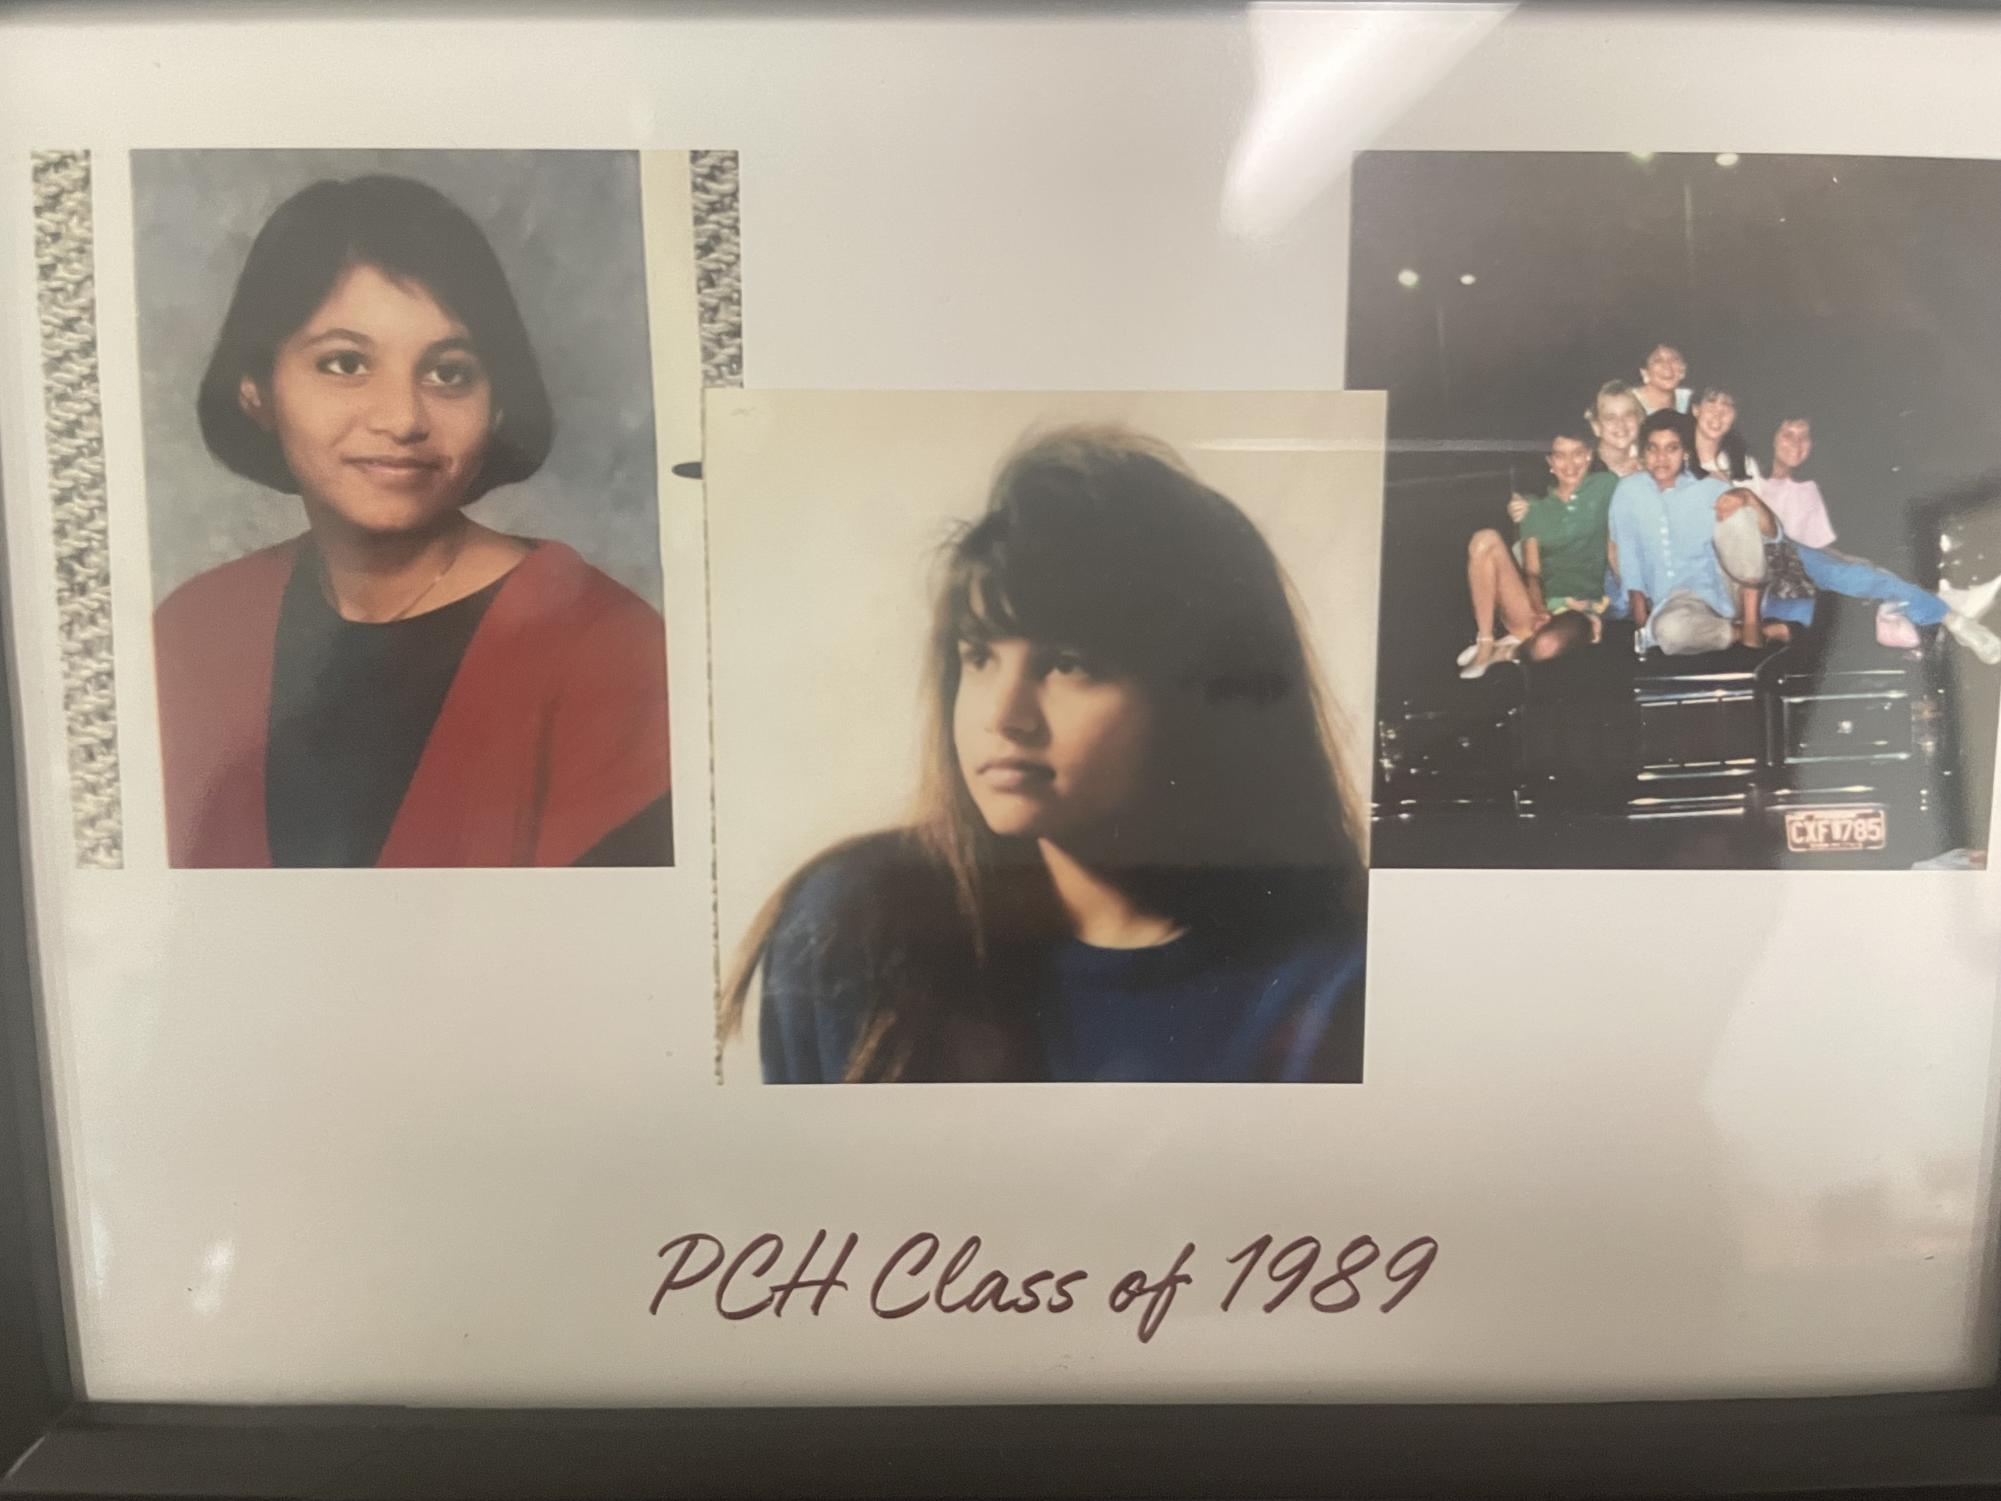 Shruti Upadhyay at three different points in her high school career. (Left) Upadhyay as a freshman. (Middle) Upadhyay as a senior. (Right) Upadhyay on the top of her car at the senior lock in. 